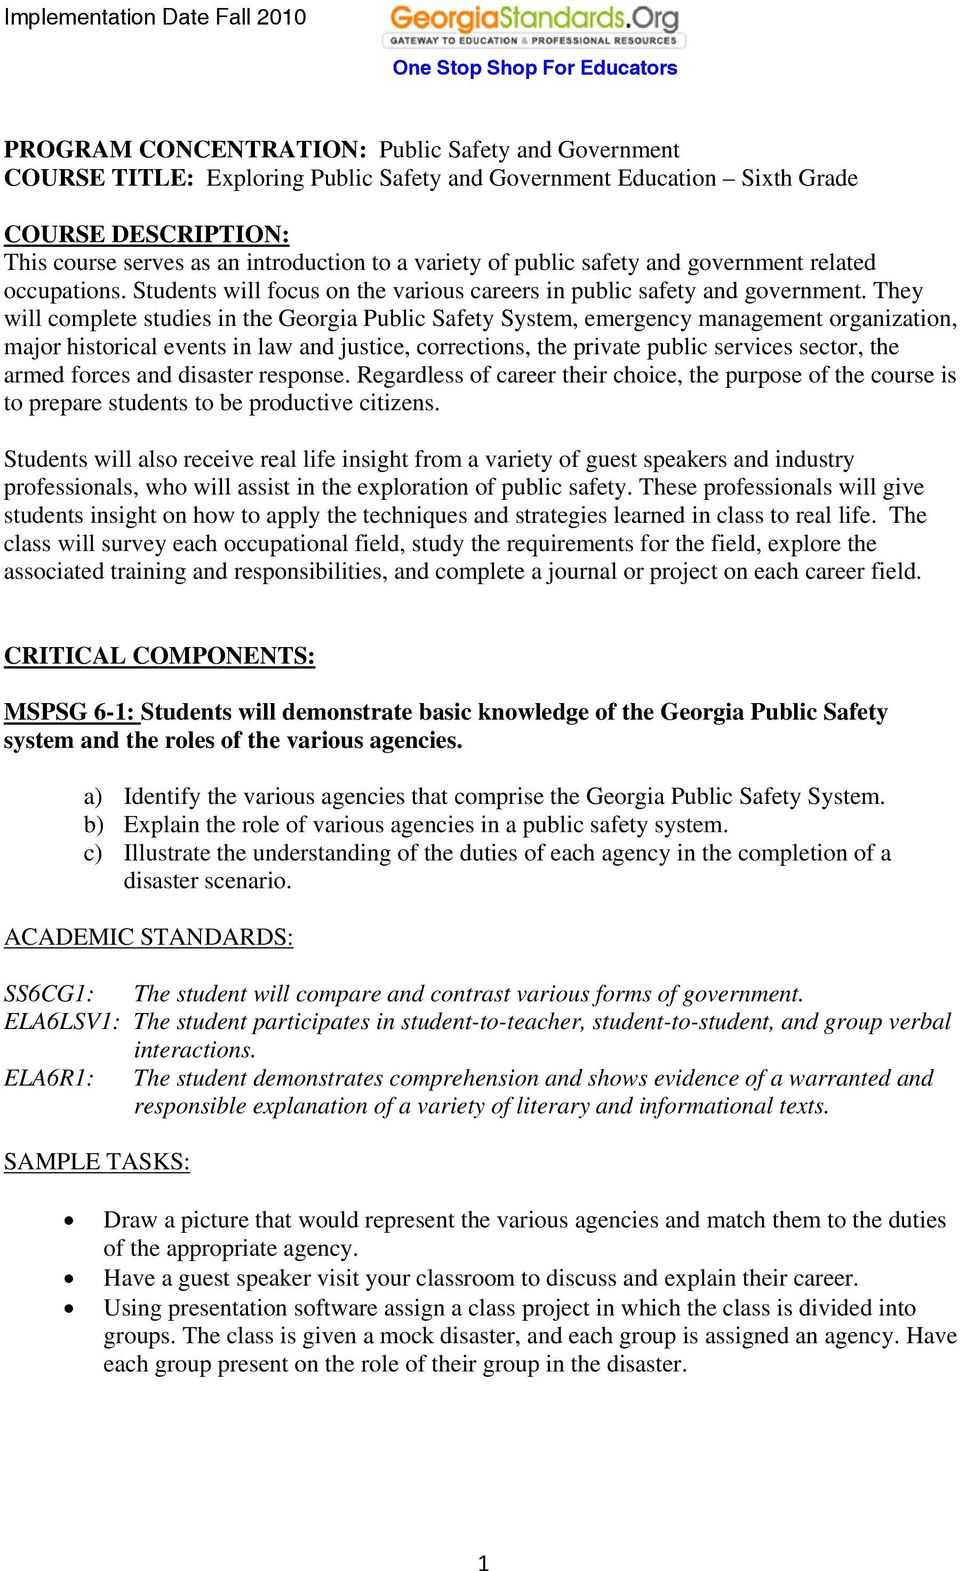 They will complete studies in the Georgia Public Safety System, emergency management organization, major historical events in law and justice, corrections, the private public services sector, the